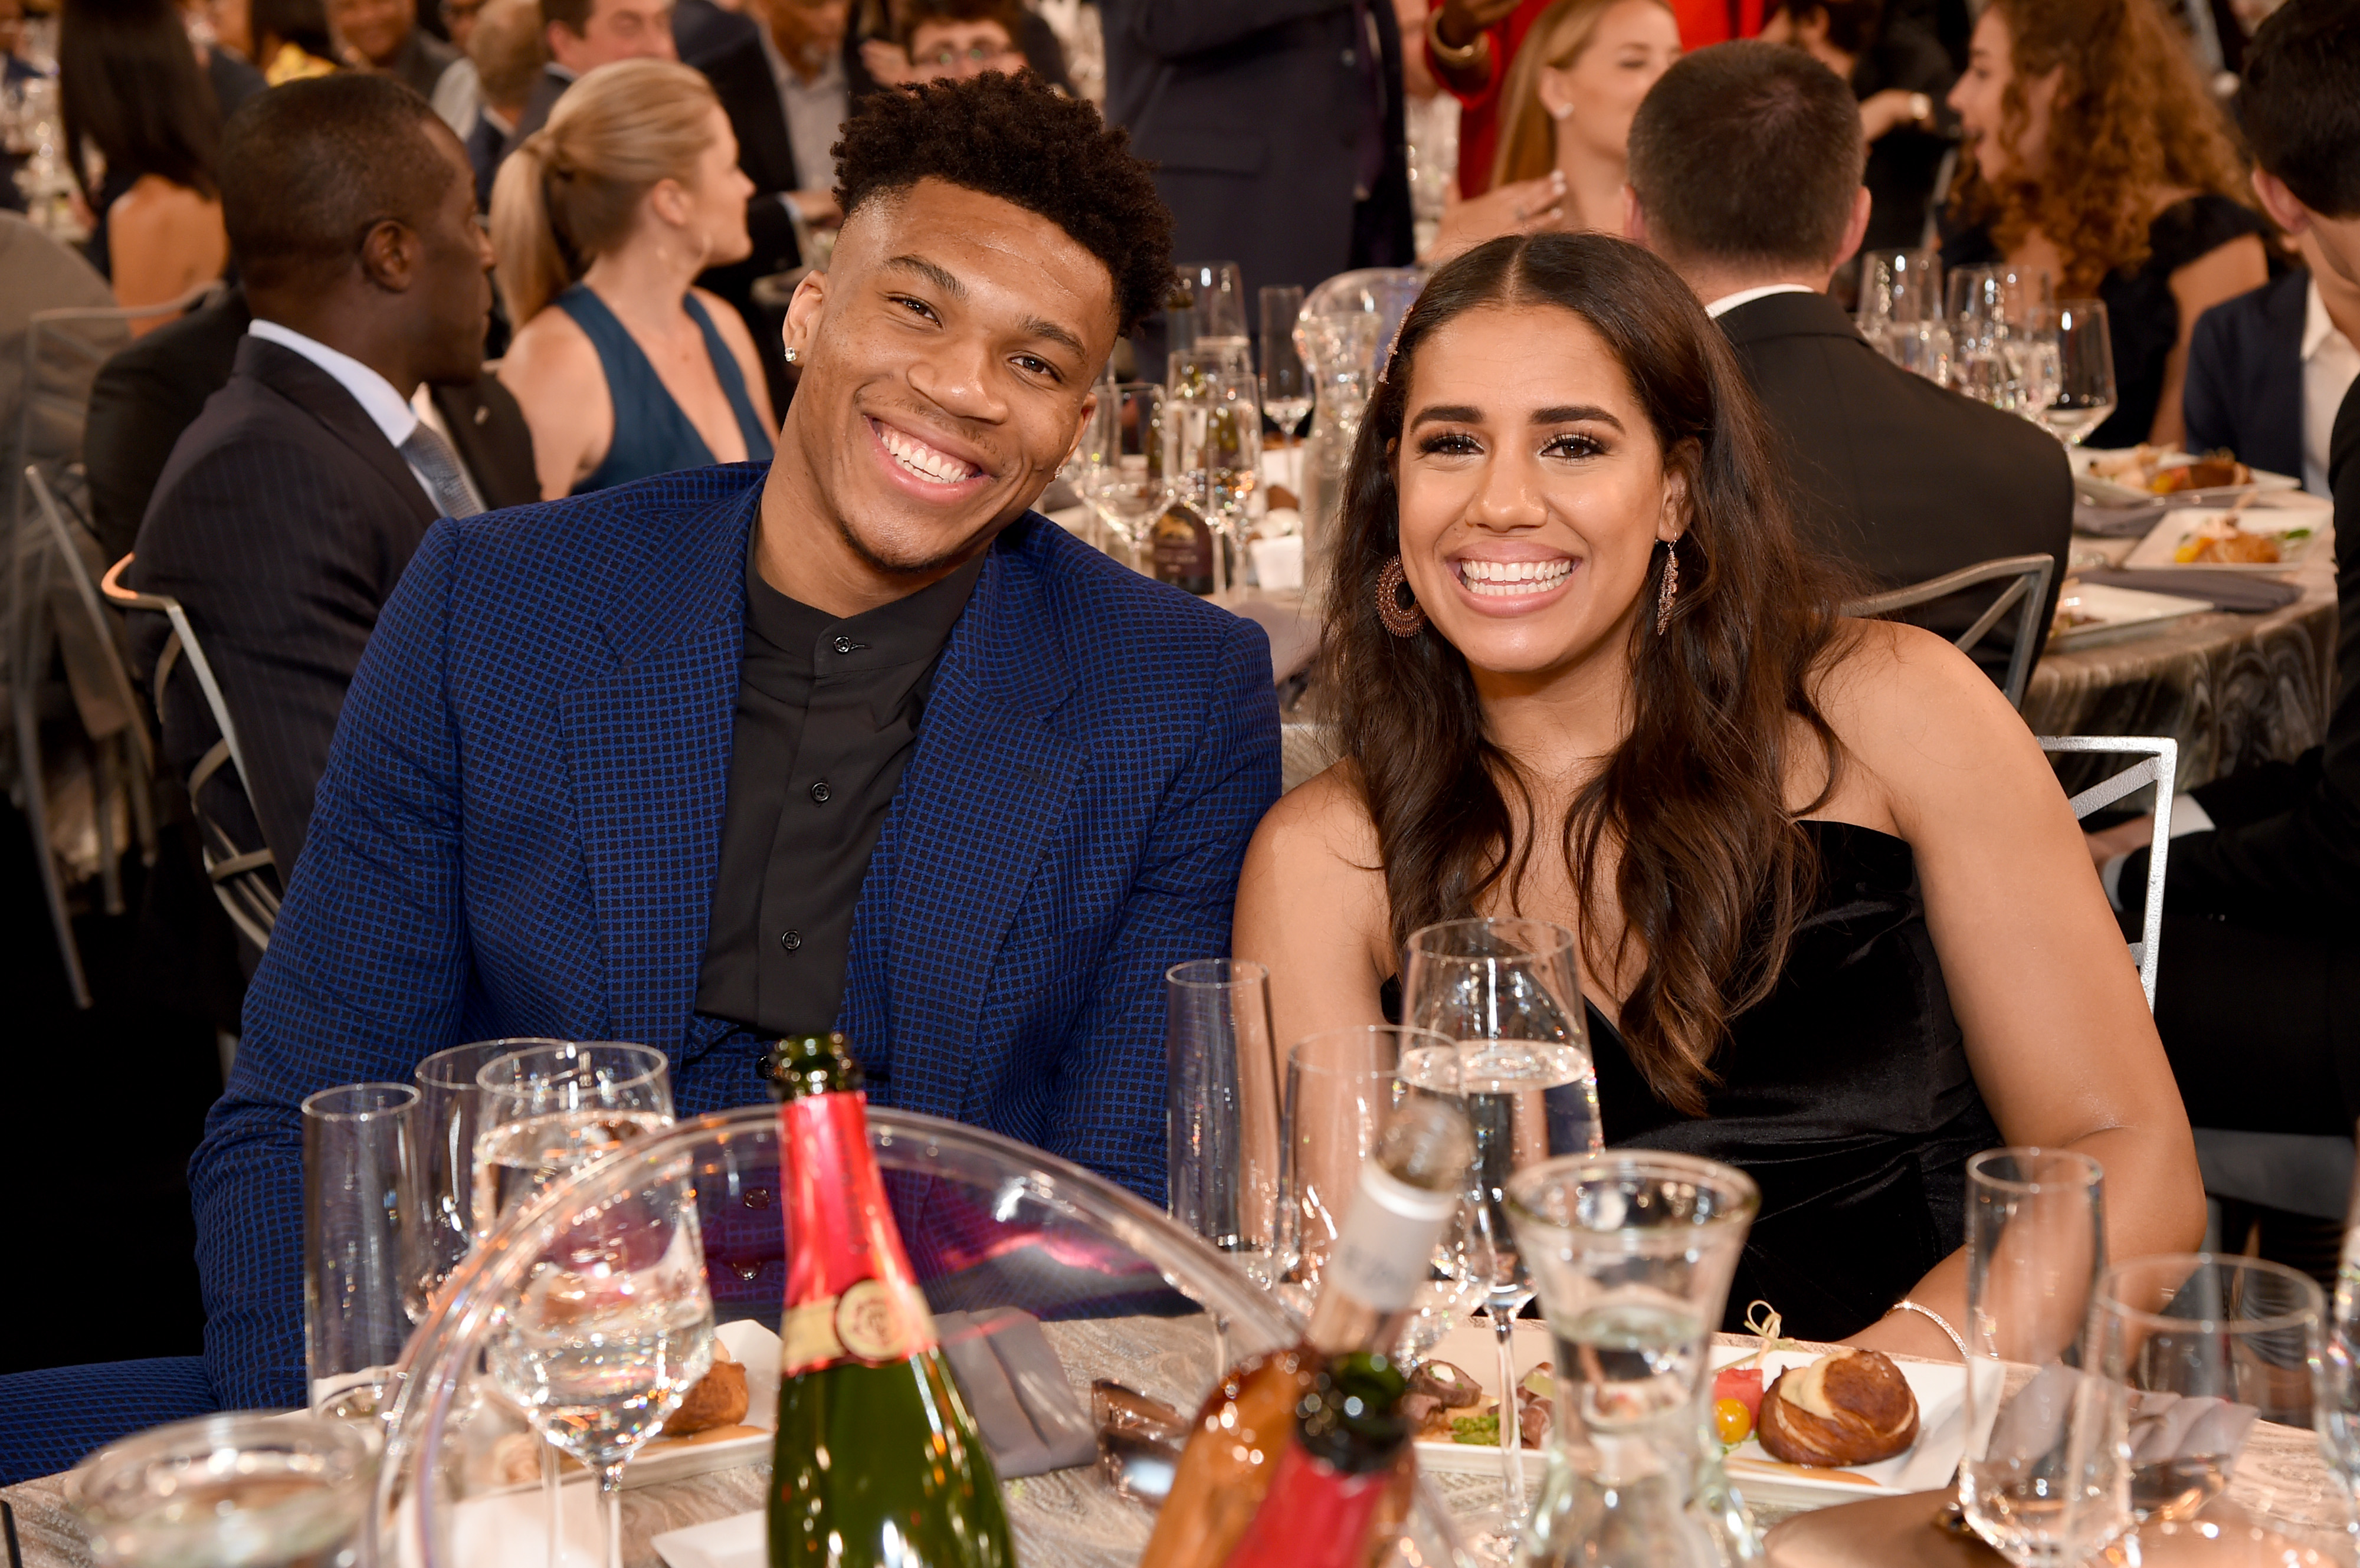 Who Is Giannis Antetokounmpo's Girlfriend? Know All About Her